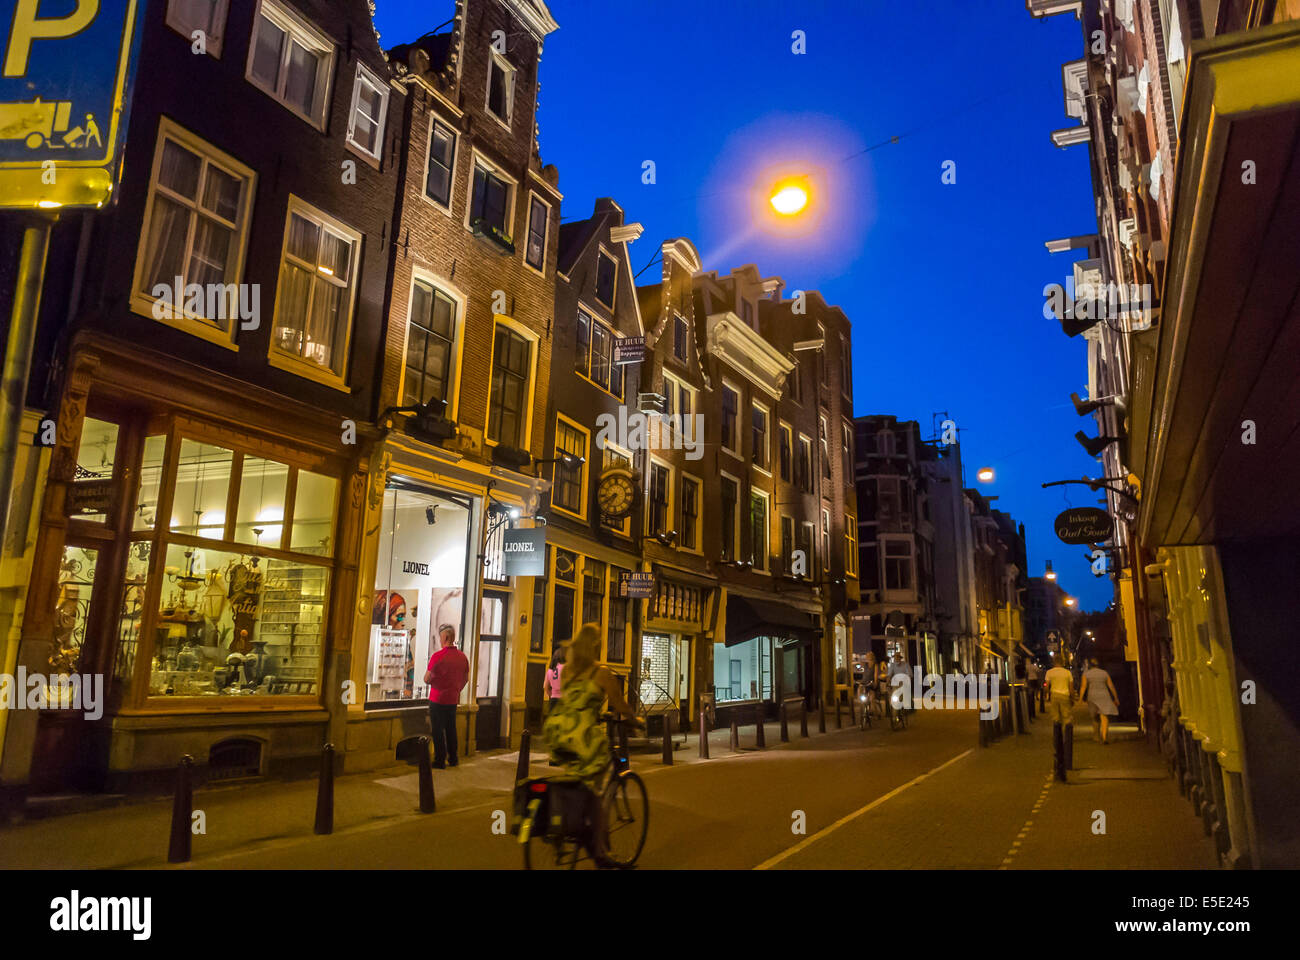 amsterdam, Holland,  The Netherlands, Street Scene with lighting, Local neighbourhoods, Row shops fronts, Urban street by night Stock Photo